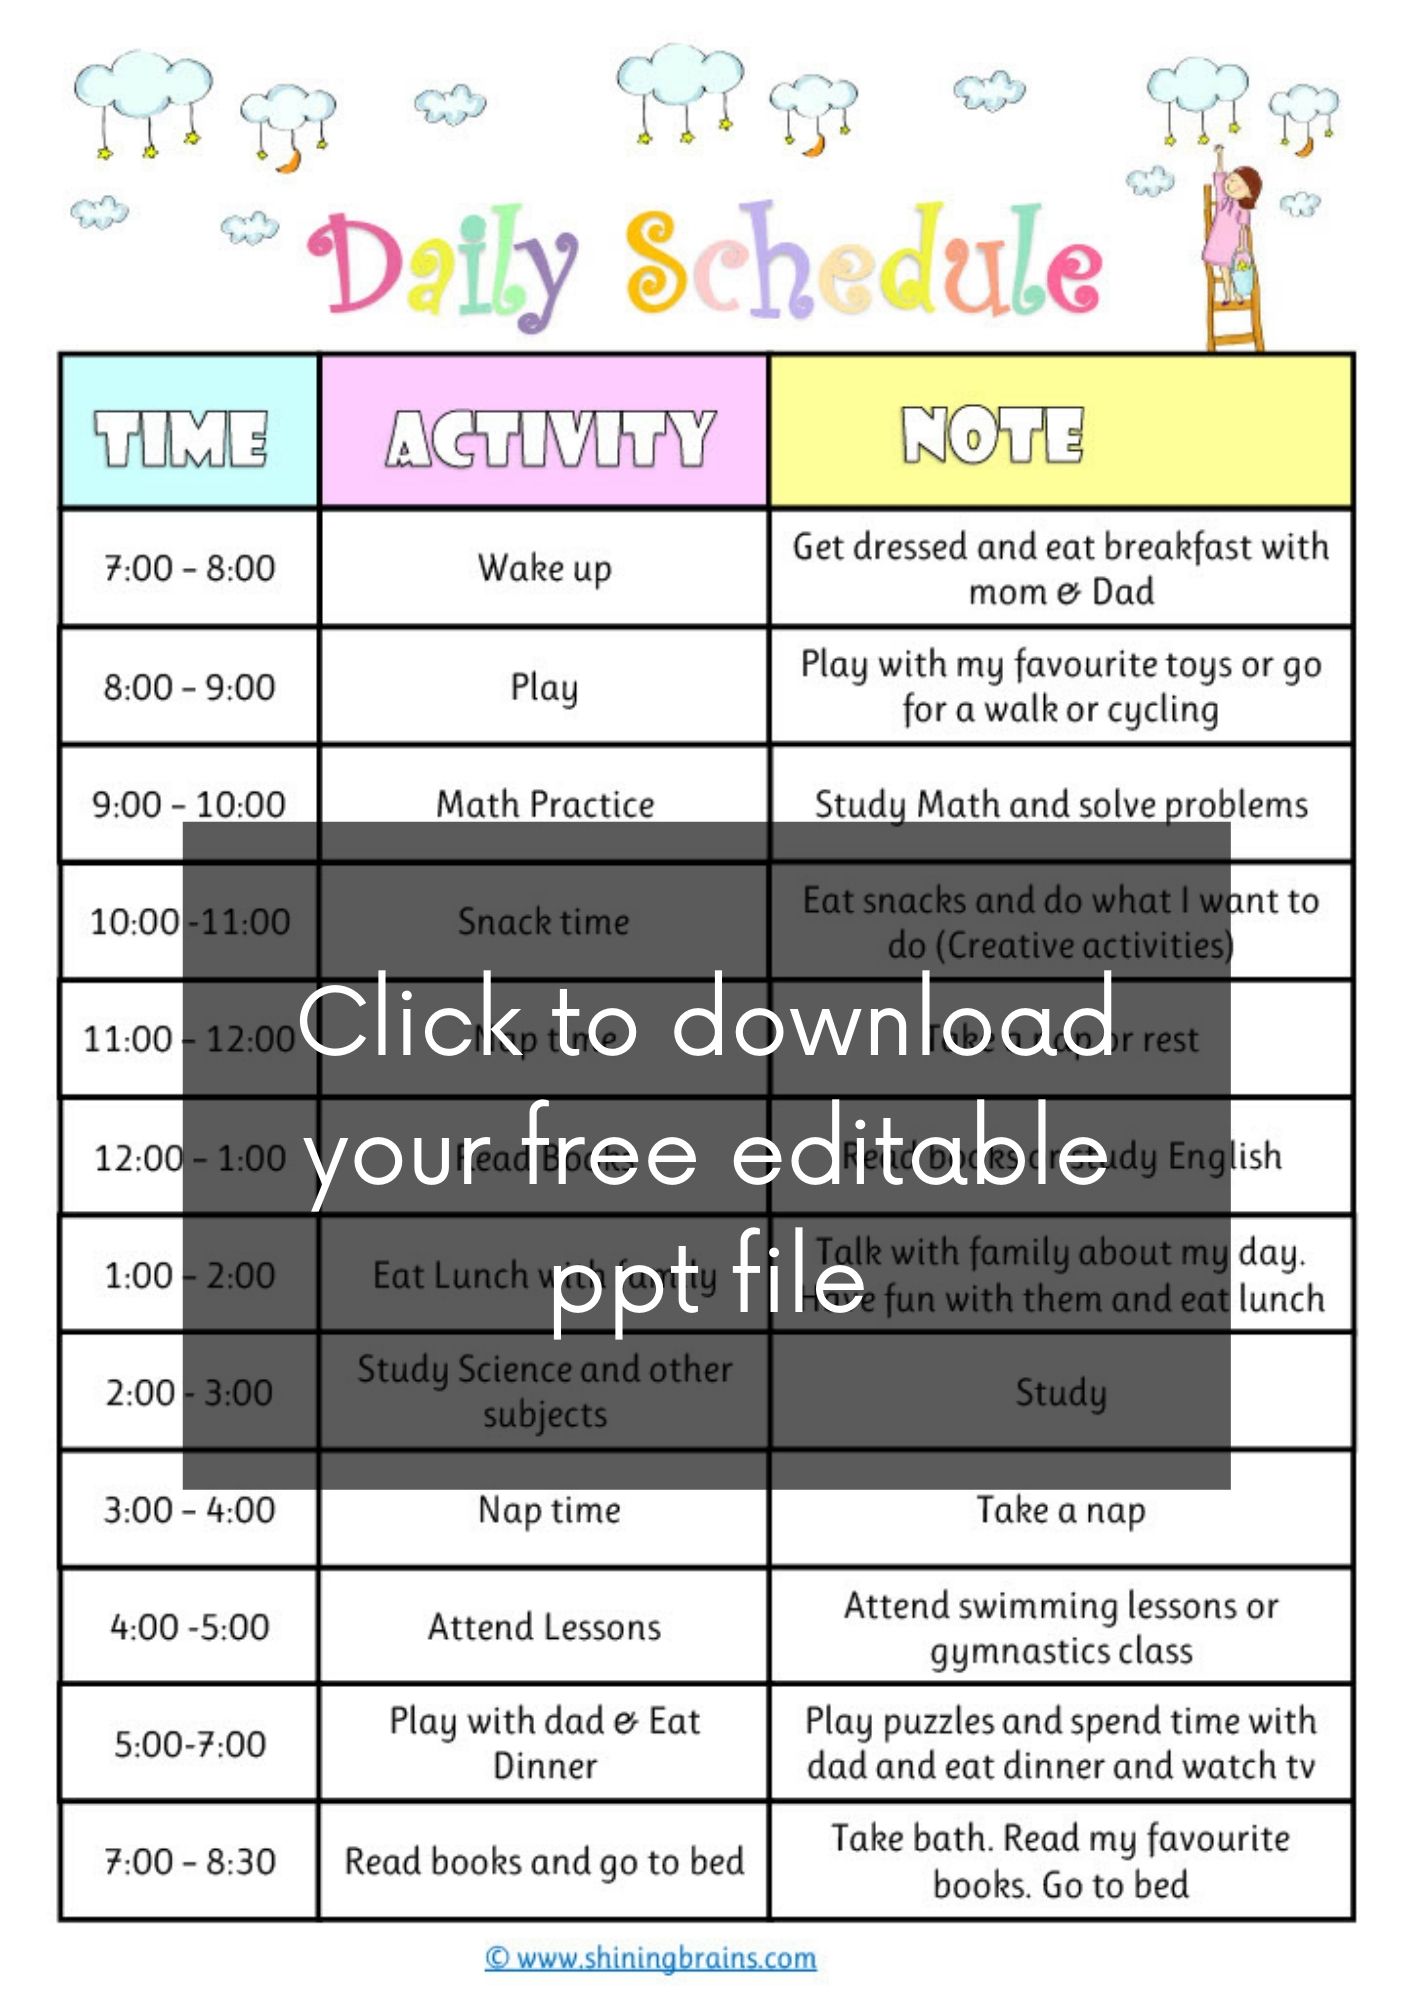 daily tasks schedule templates card for kids